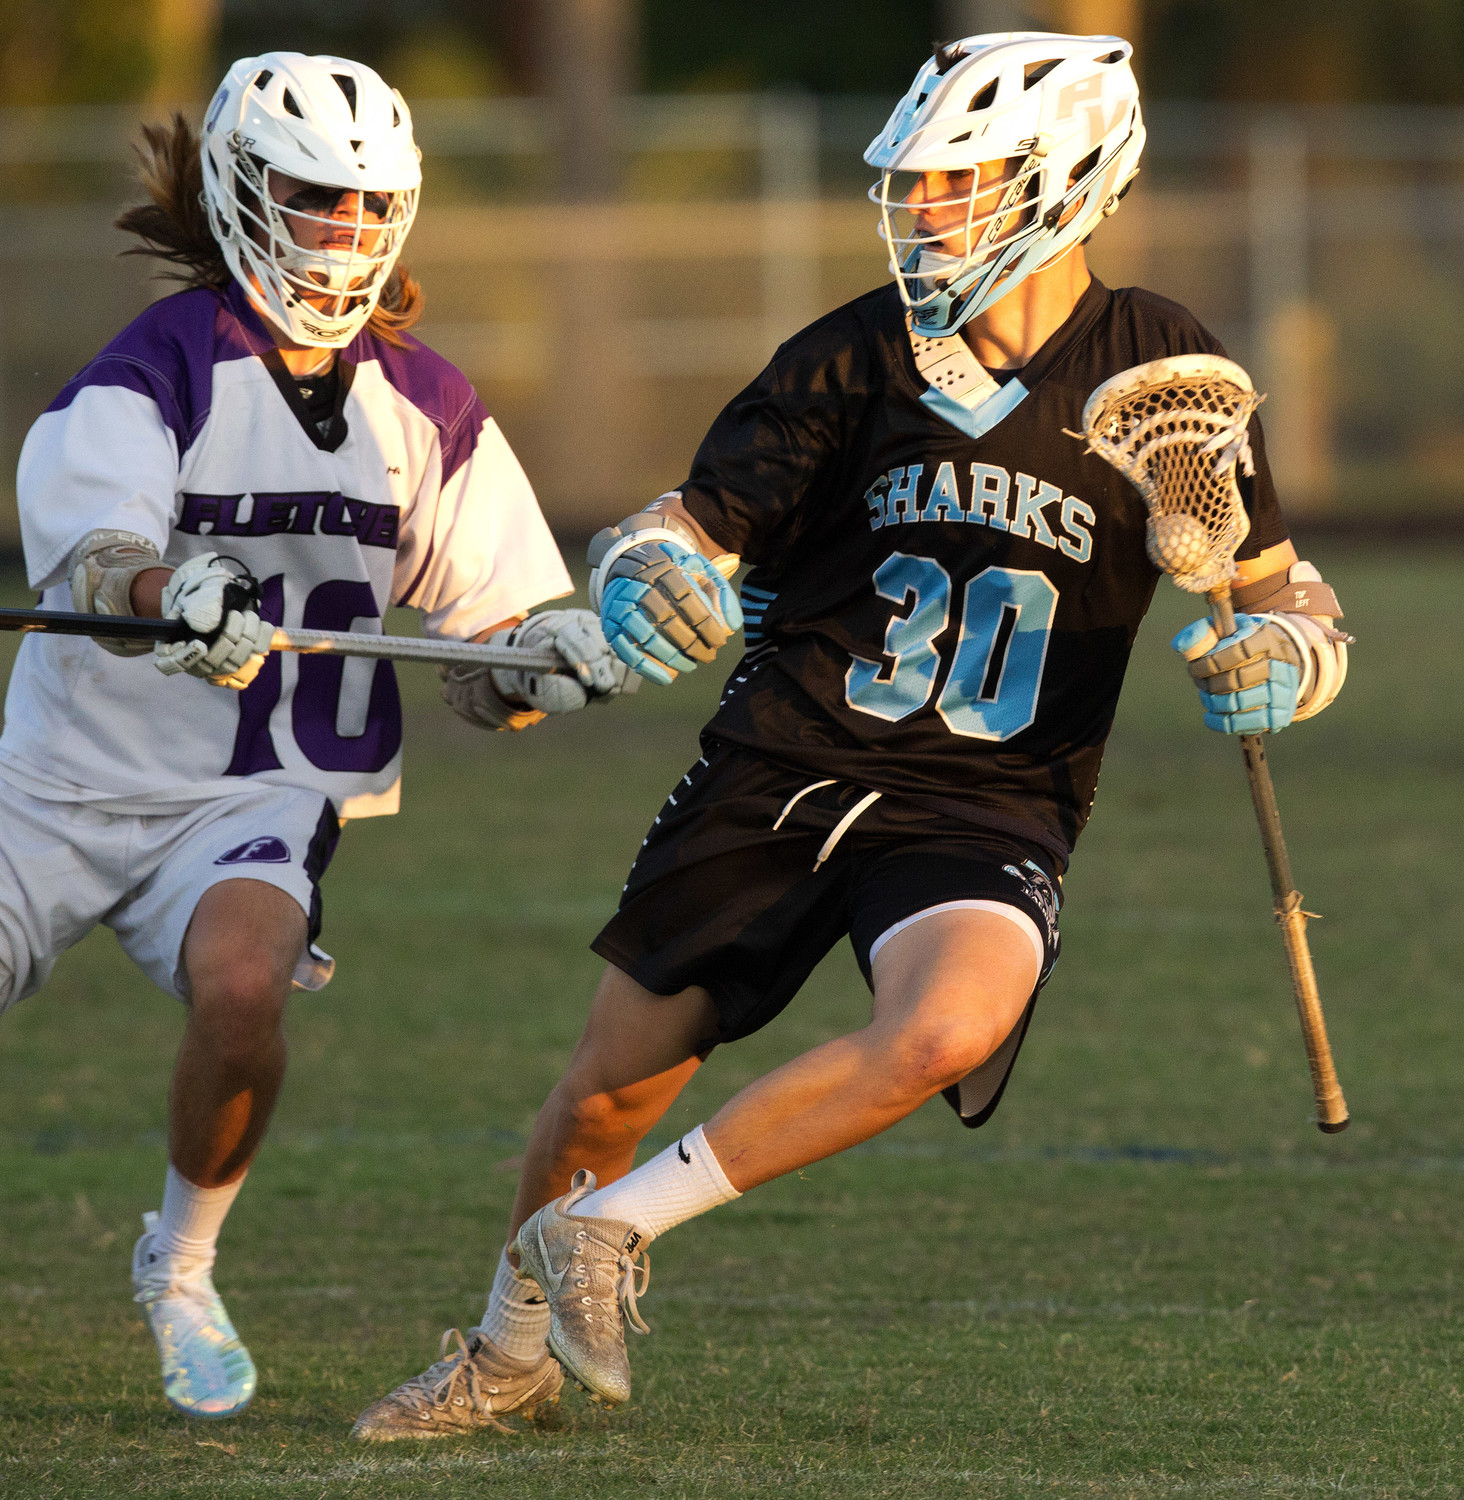 Patrick Dotsikas makes a move against a defender in the Sharks’ 21-4 win over Fletcher on Friday, April 27.